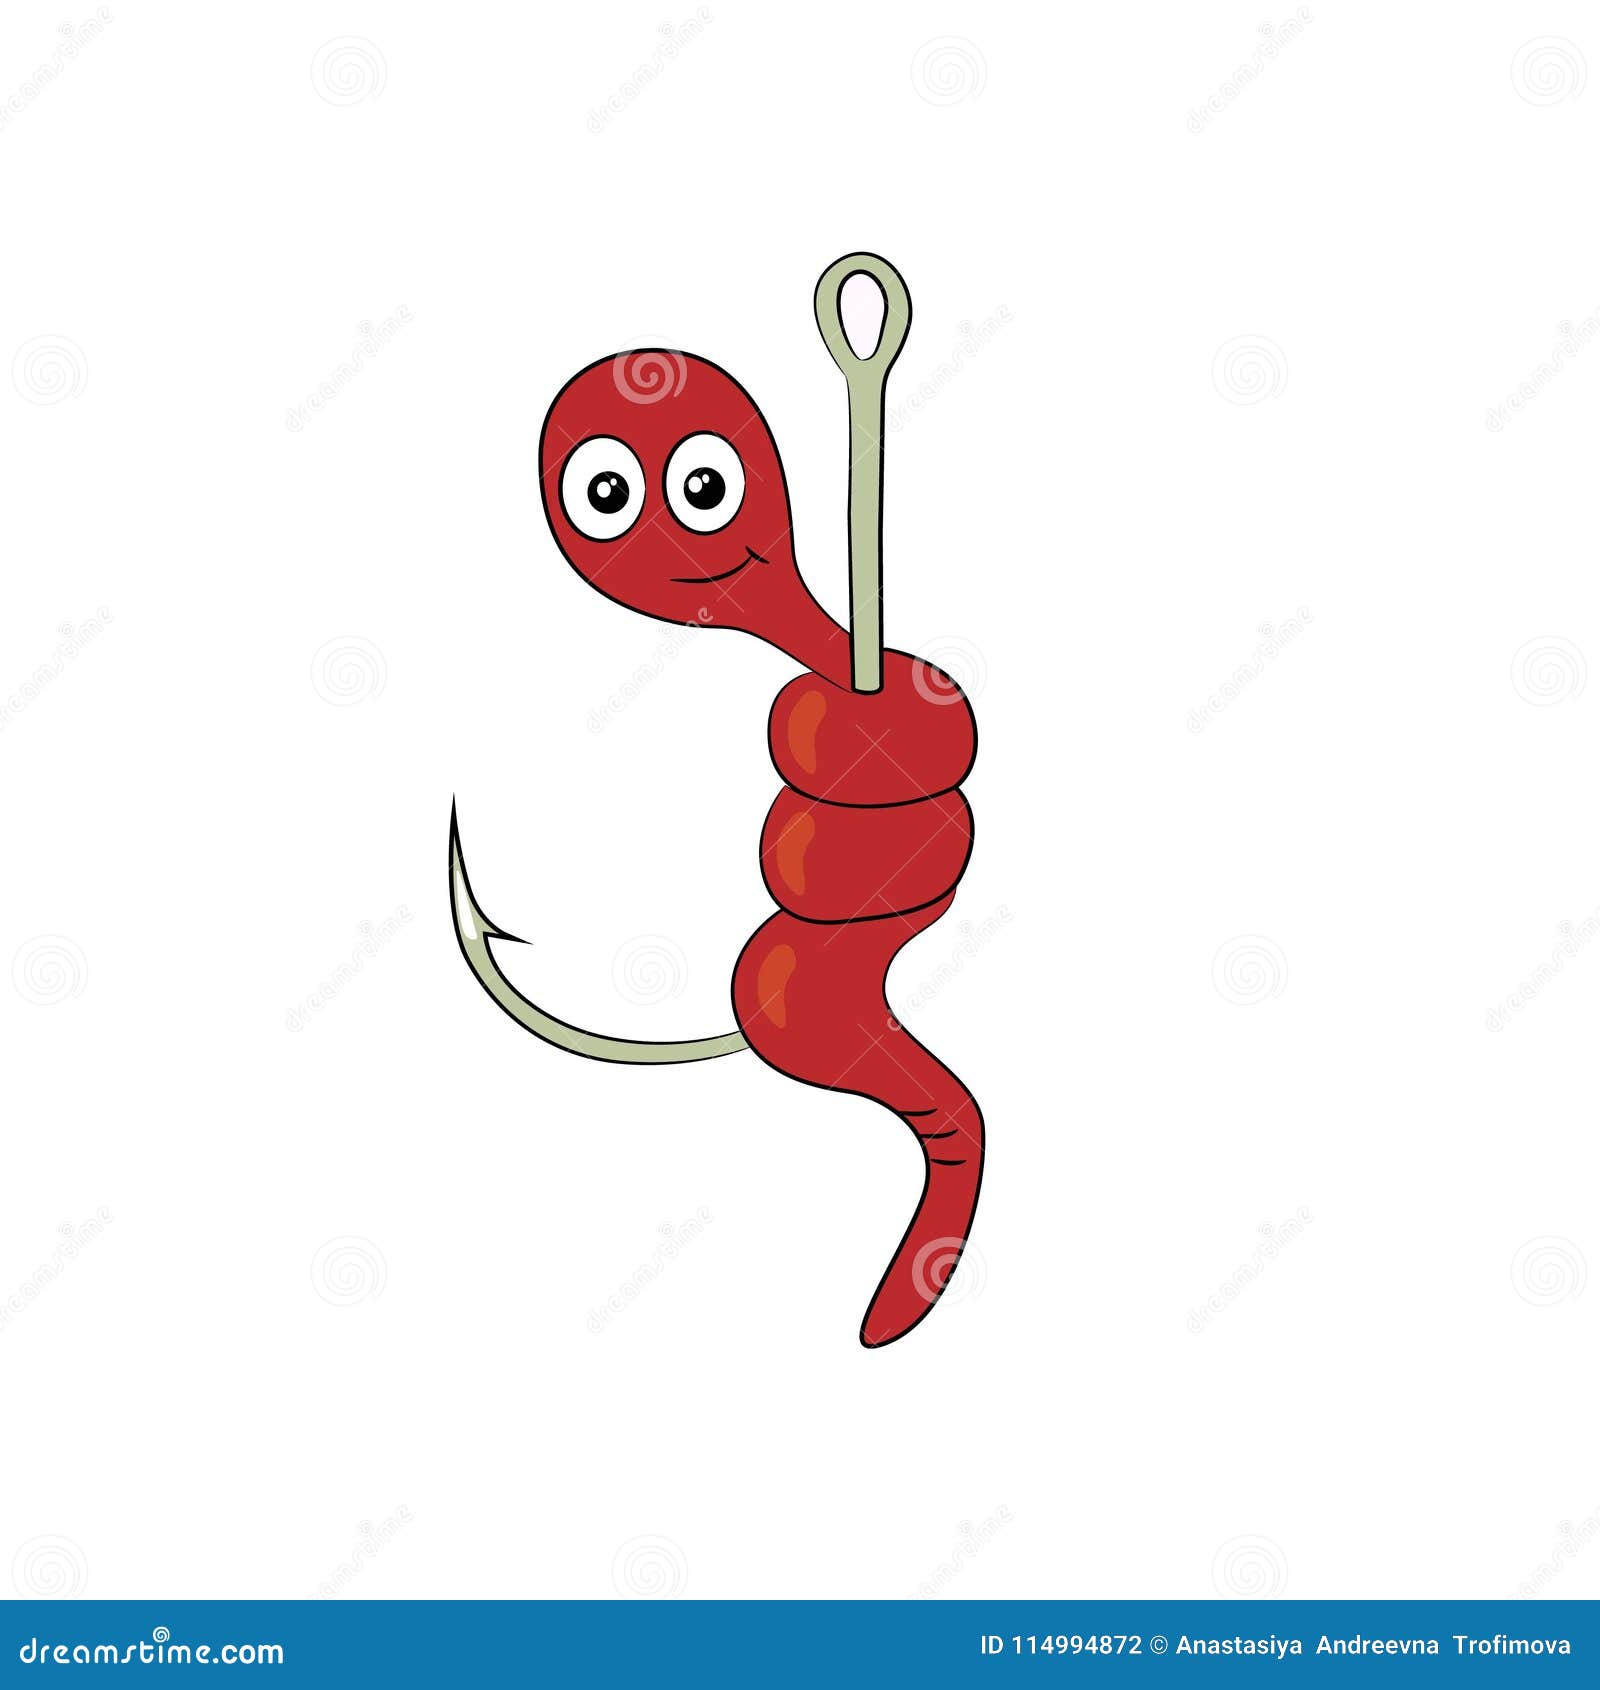 Worm on a hook stock vector. Illustration of worm, isolated